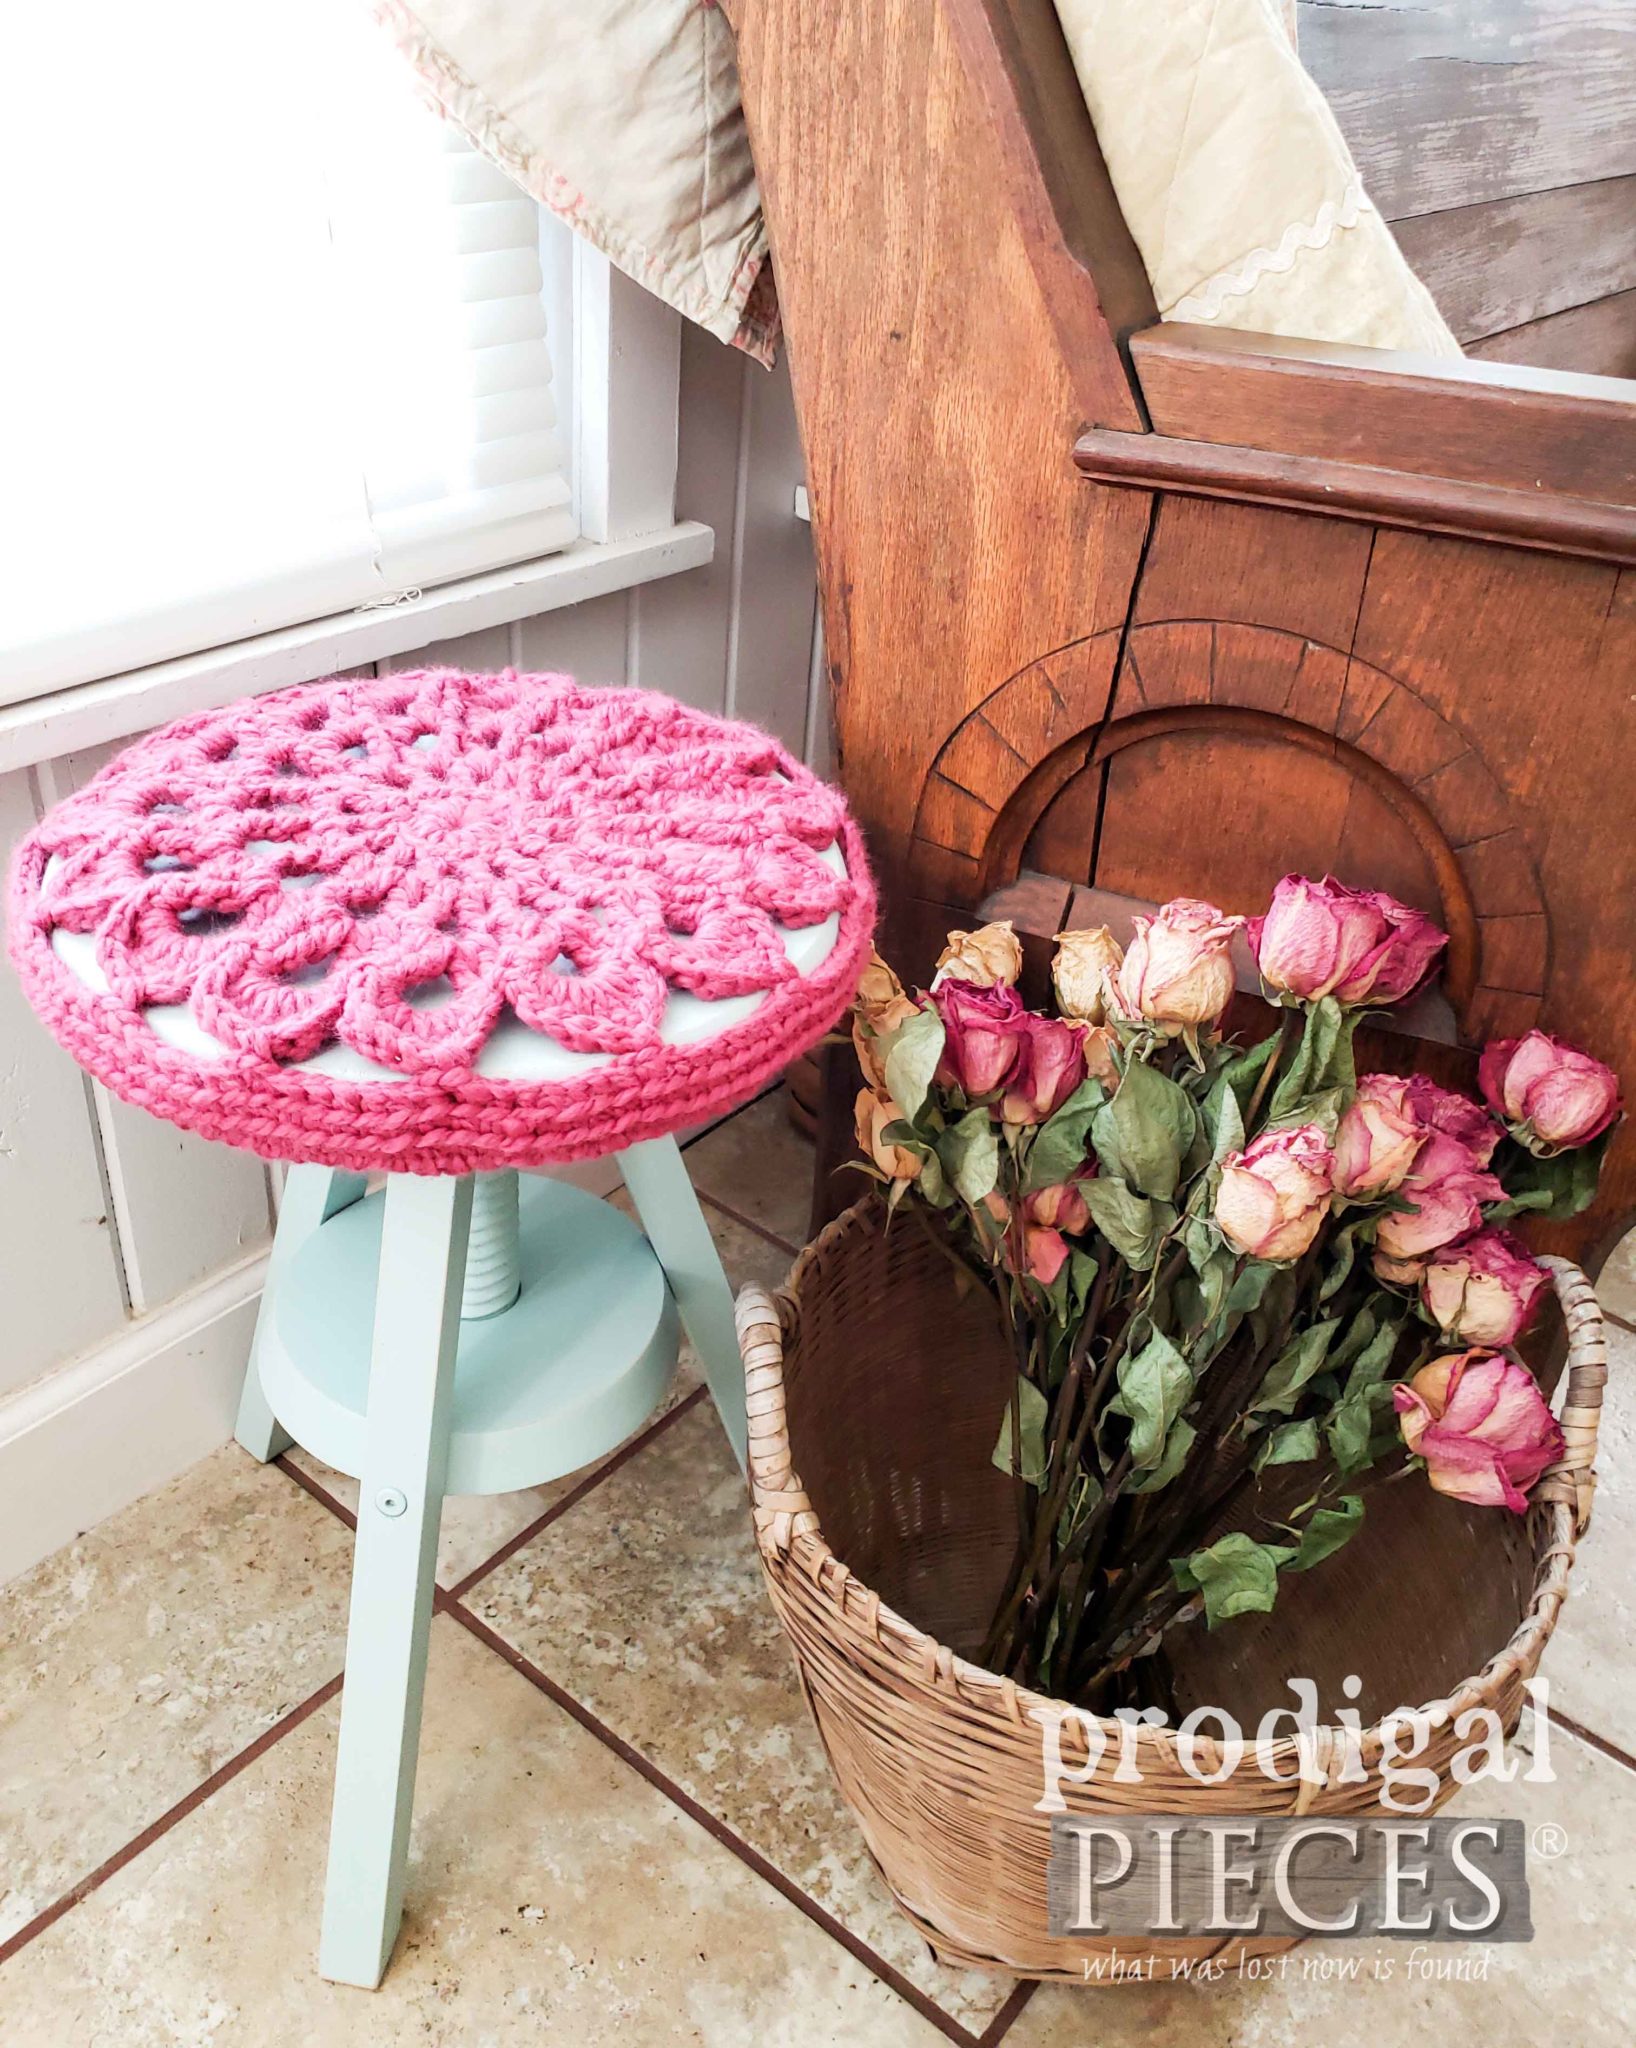 Handmade Wool Crochet Cottage Style Stool Cover by Larissa of Prodigal Pieces | prodigalpieces.com #prodigalpieces #diy #home #homedecor #cottage #furniture